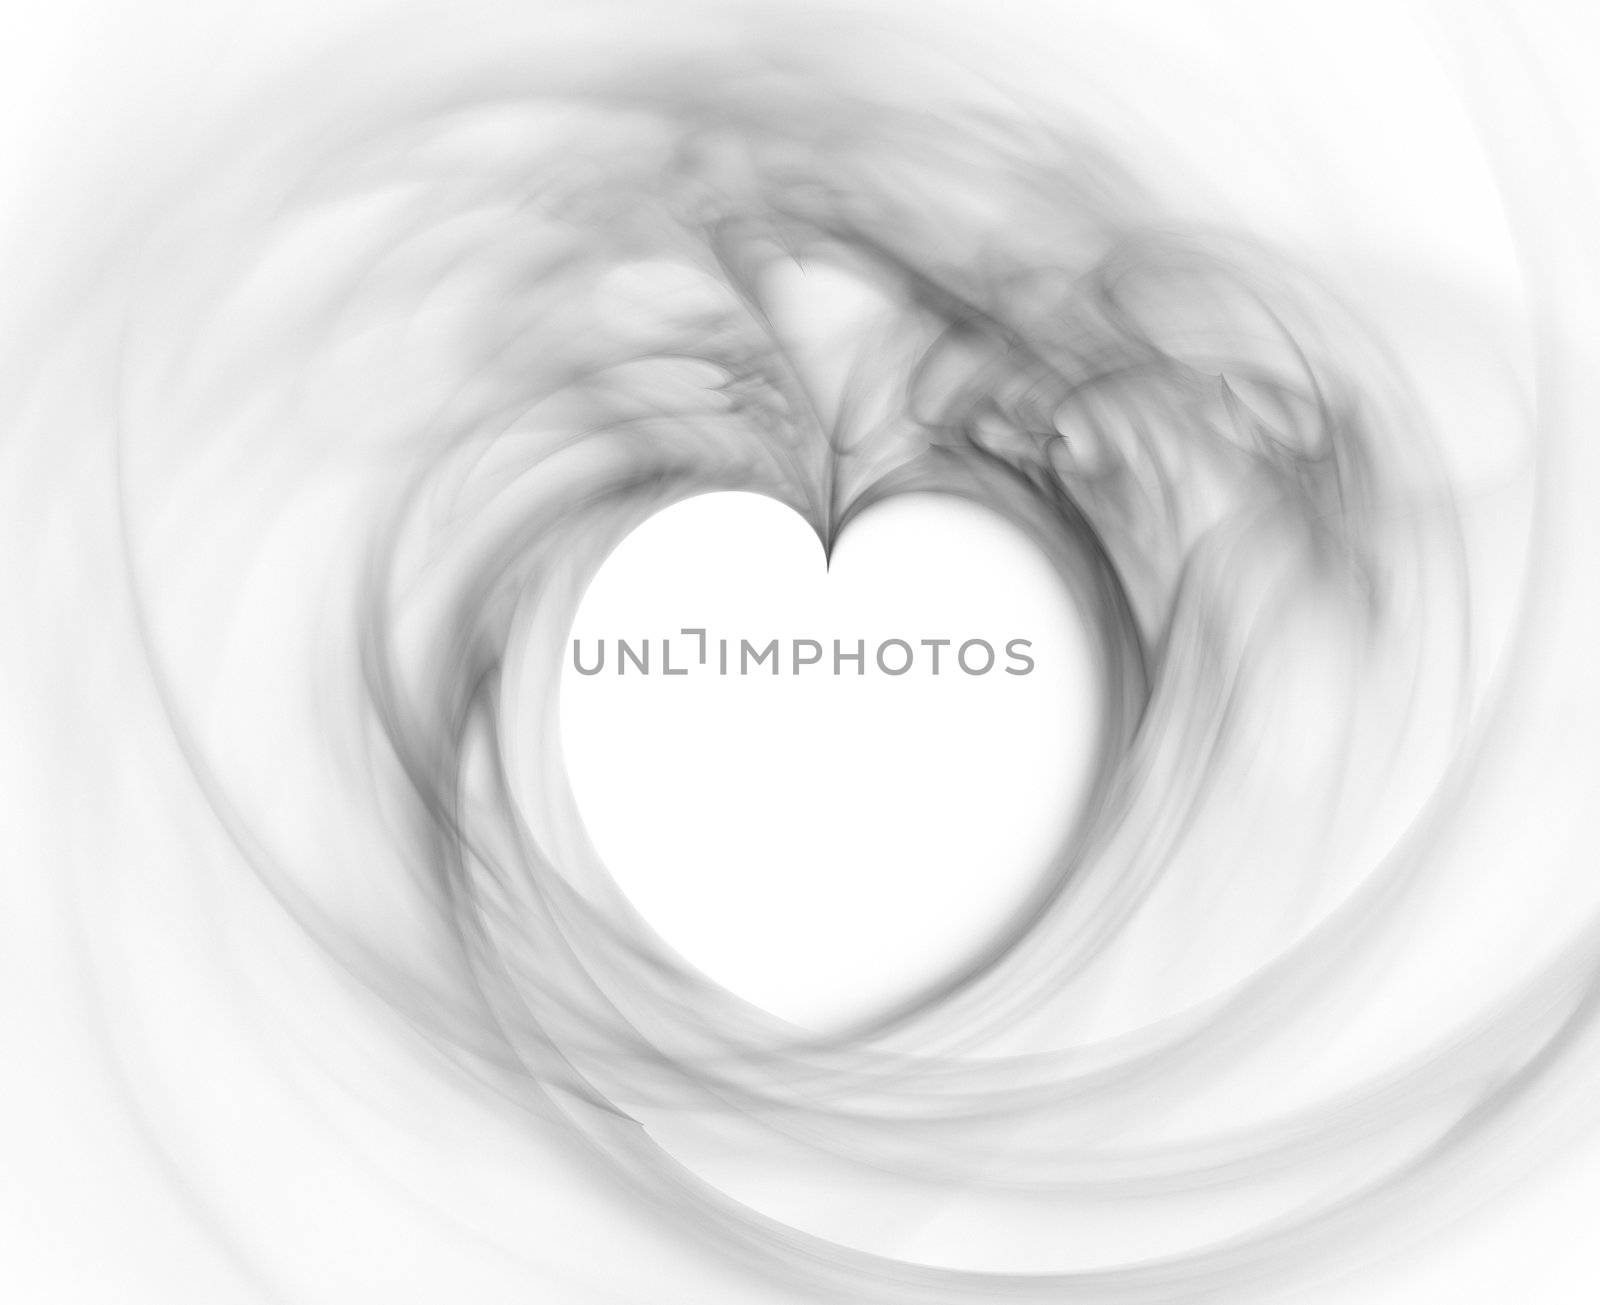 rendered flame fractal with heart shapes in grey tones, possible concepts: Sadness, depression